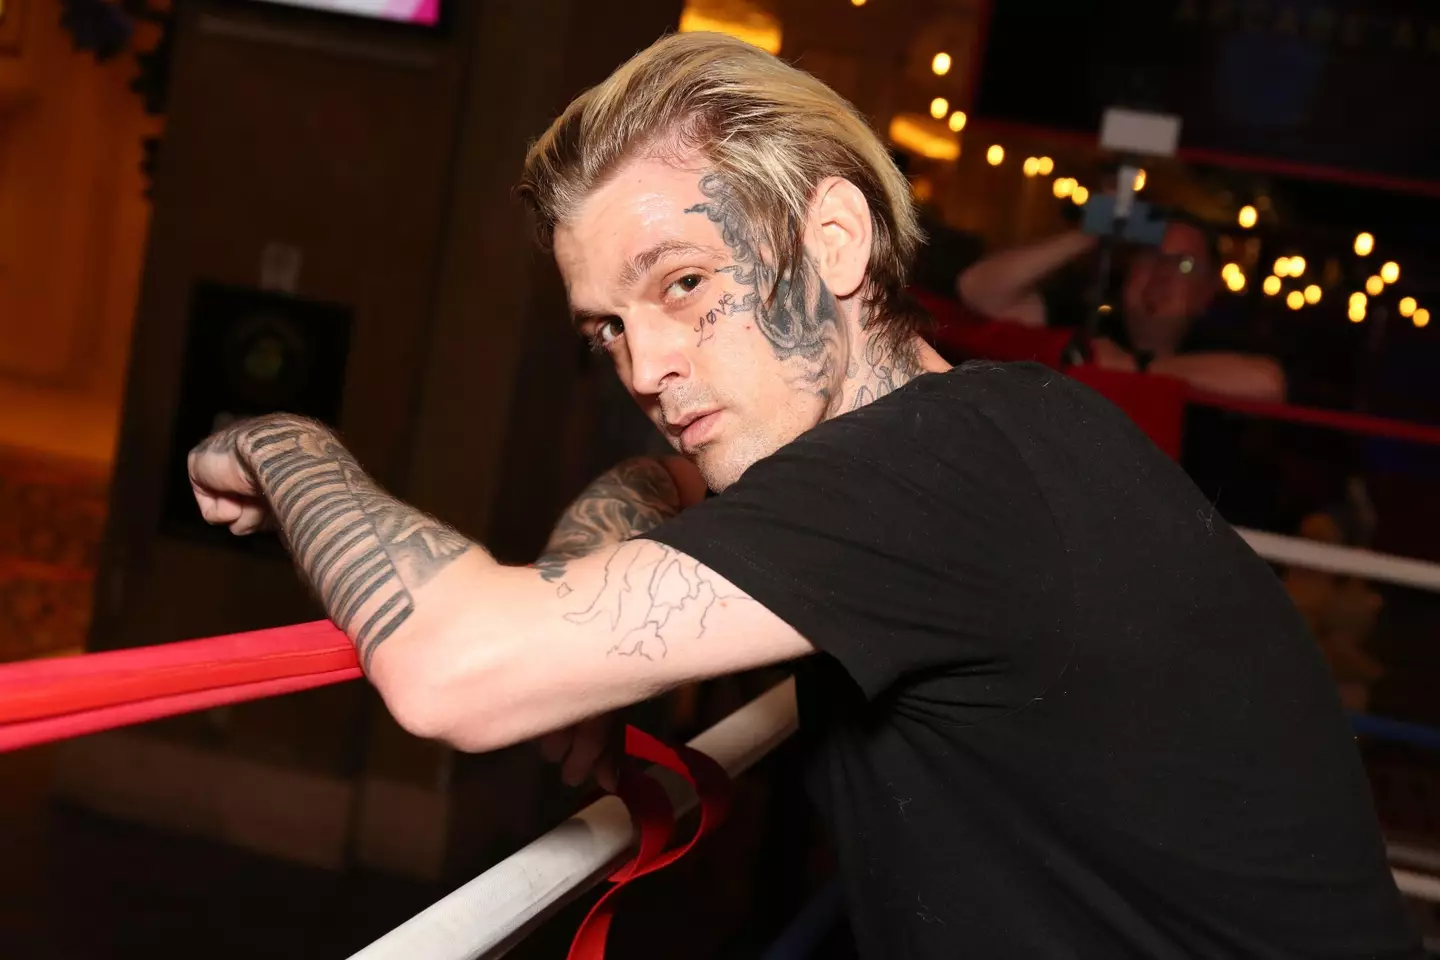 Aaron Carter was just 34 when he died on 5 November.